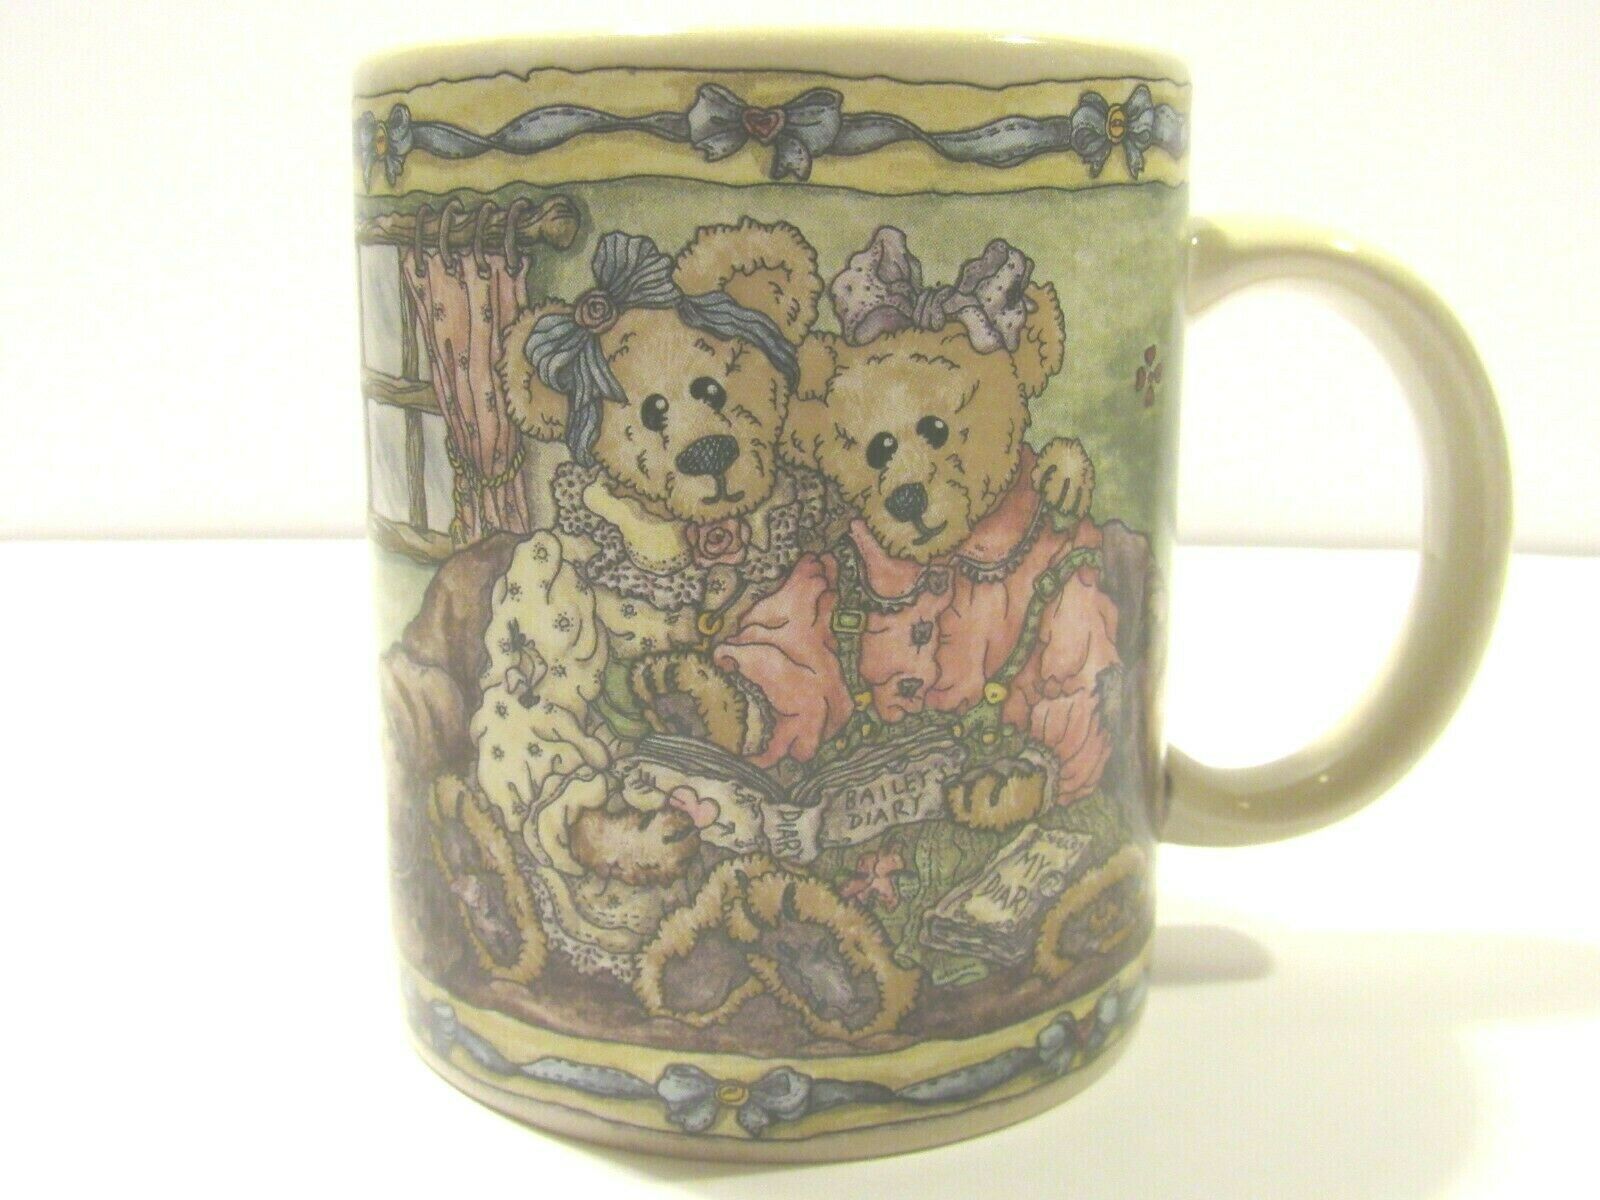 Vintage Boyds Collection Bearware Pottery Works Mug 1999 True Friendship Gift - $7.89